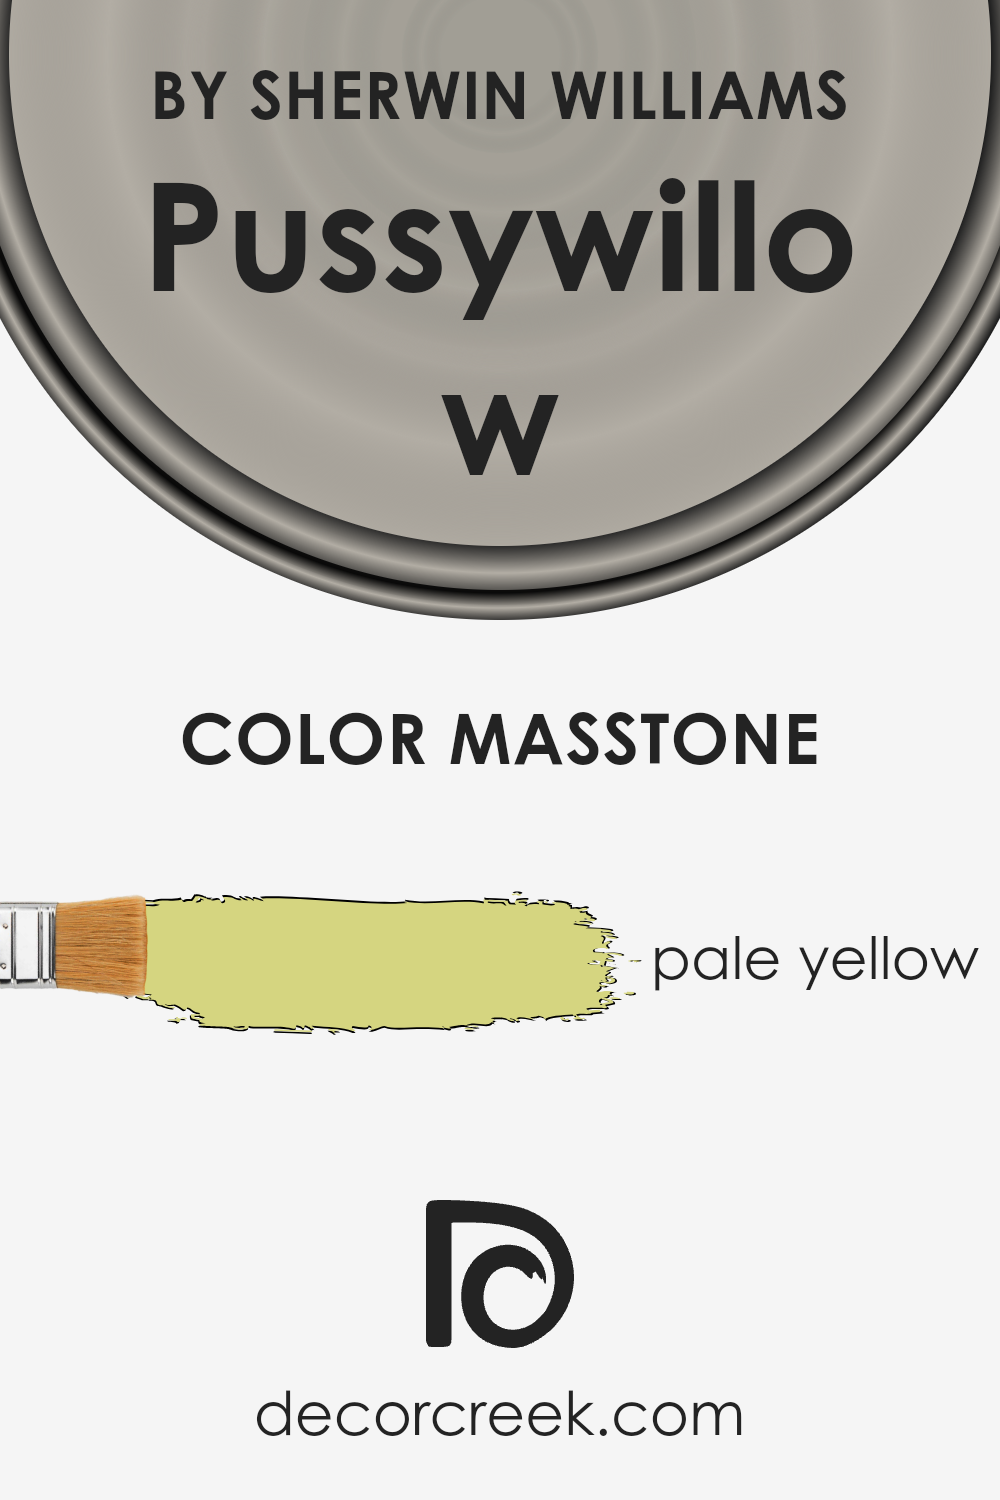 what_is_the_masstone_of_pussywillow_sw_7643